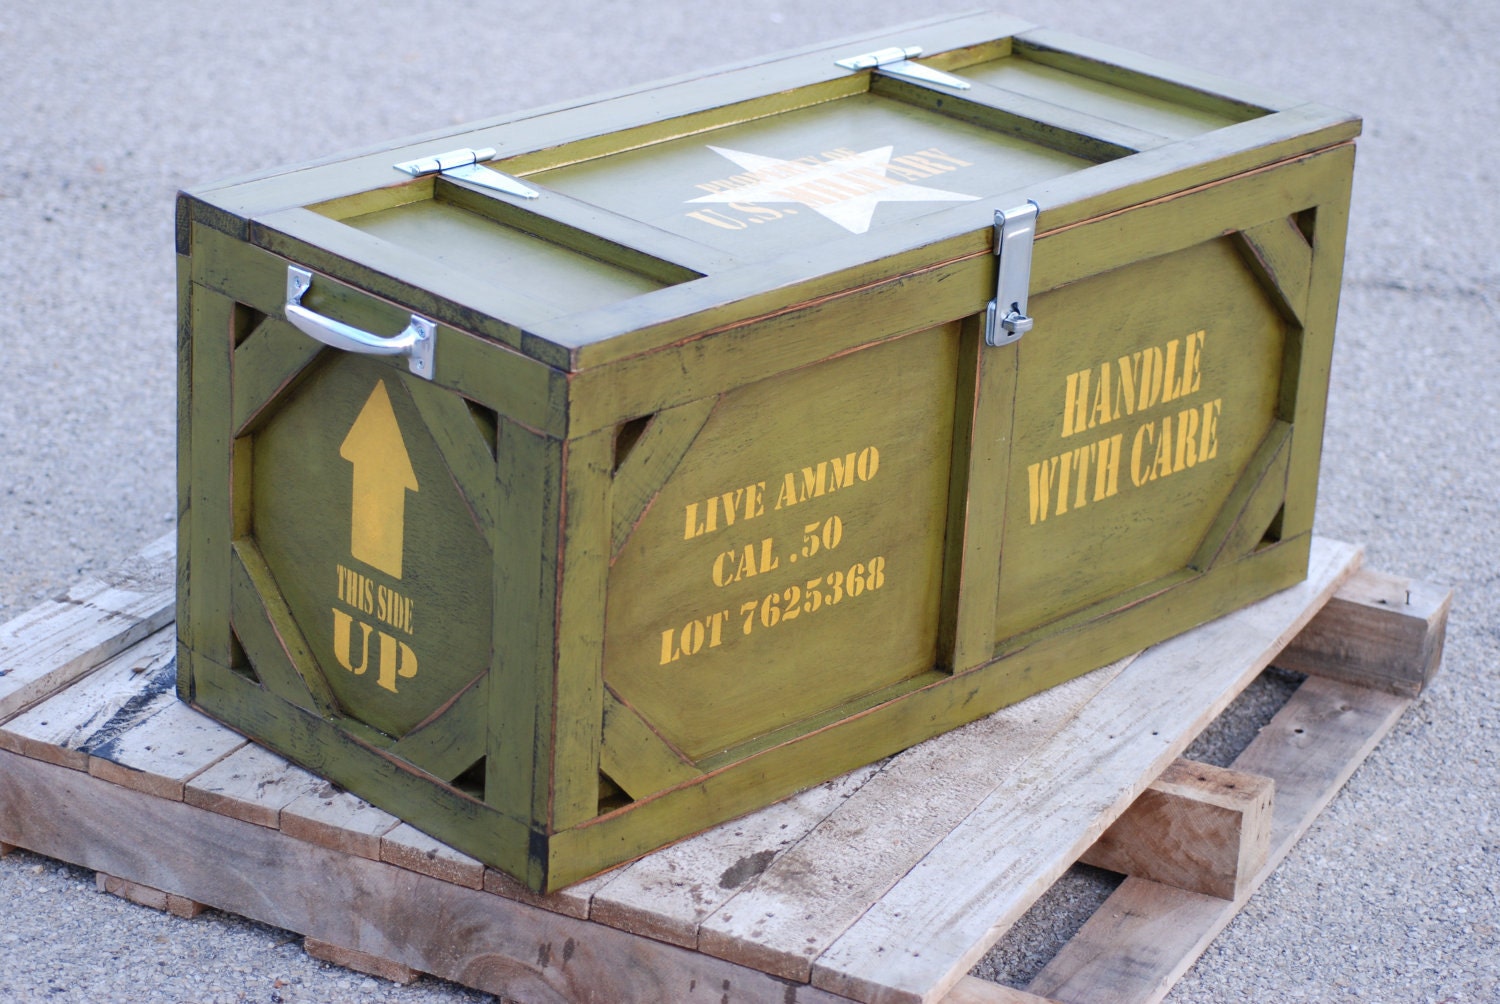 Toy box crate furniture military ammo box by ThePairOfSpades